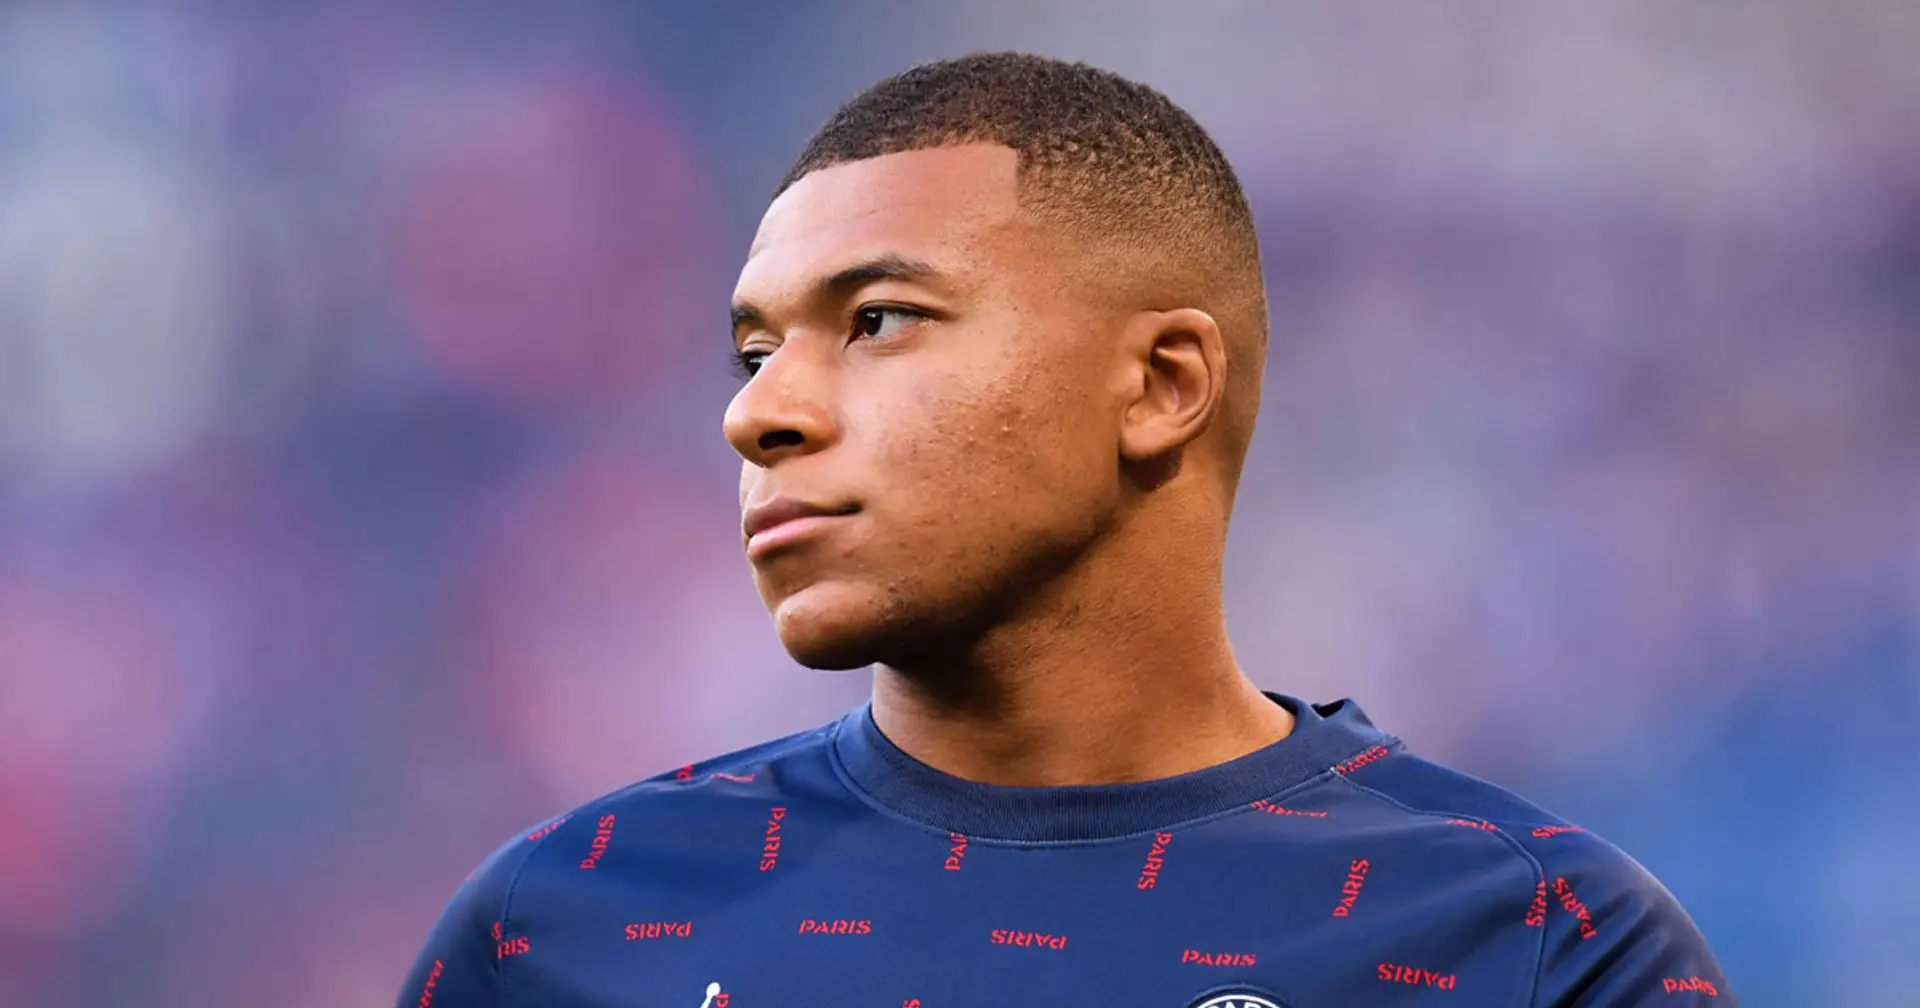 Liverpool 'most credible candidate' for Mbappe signing